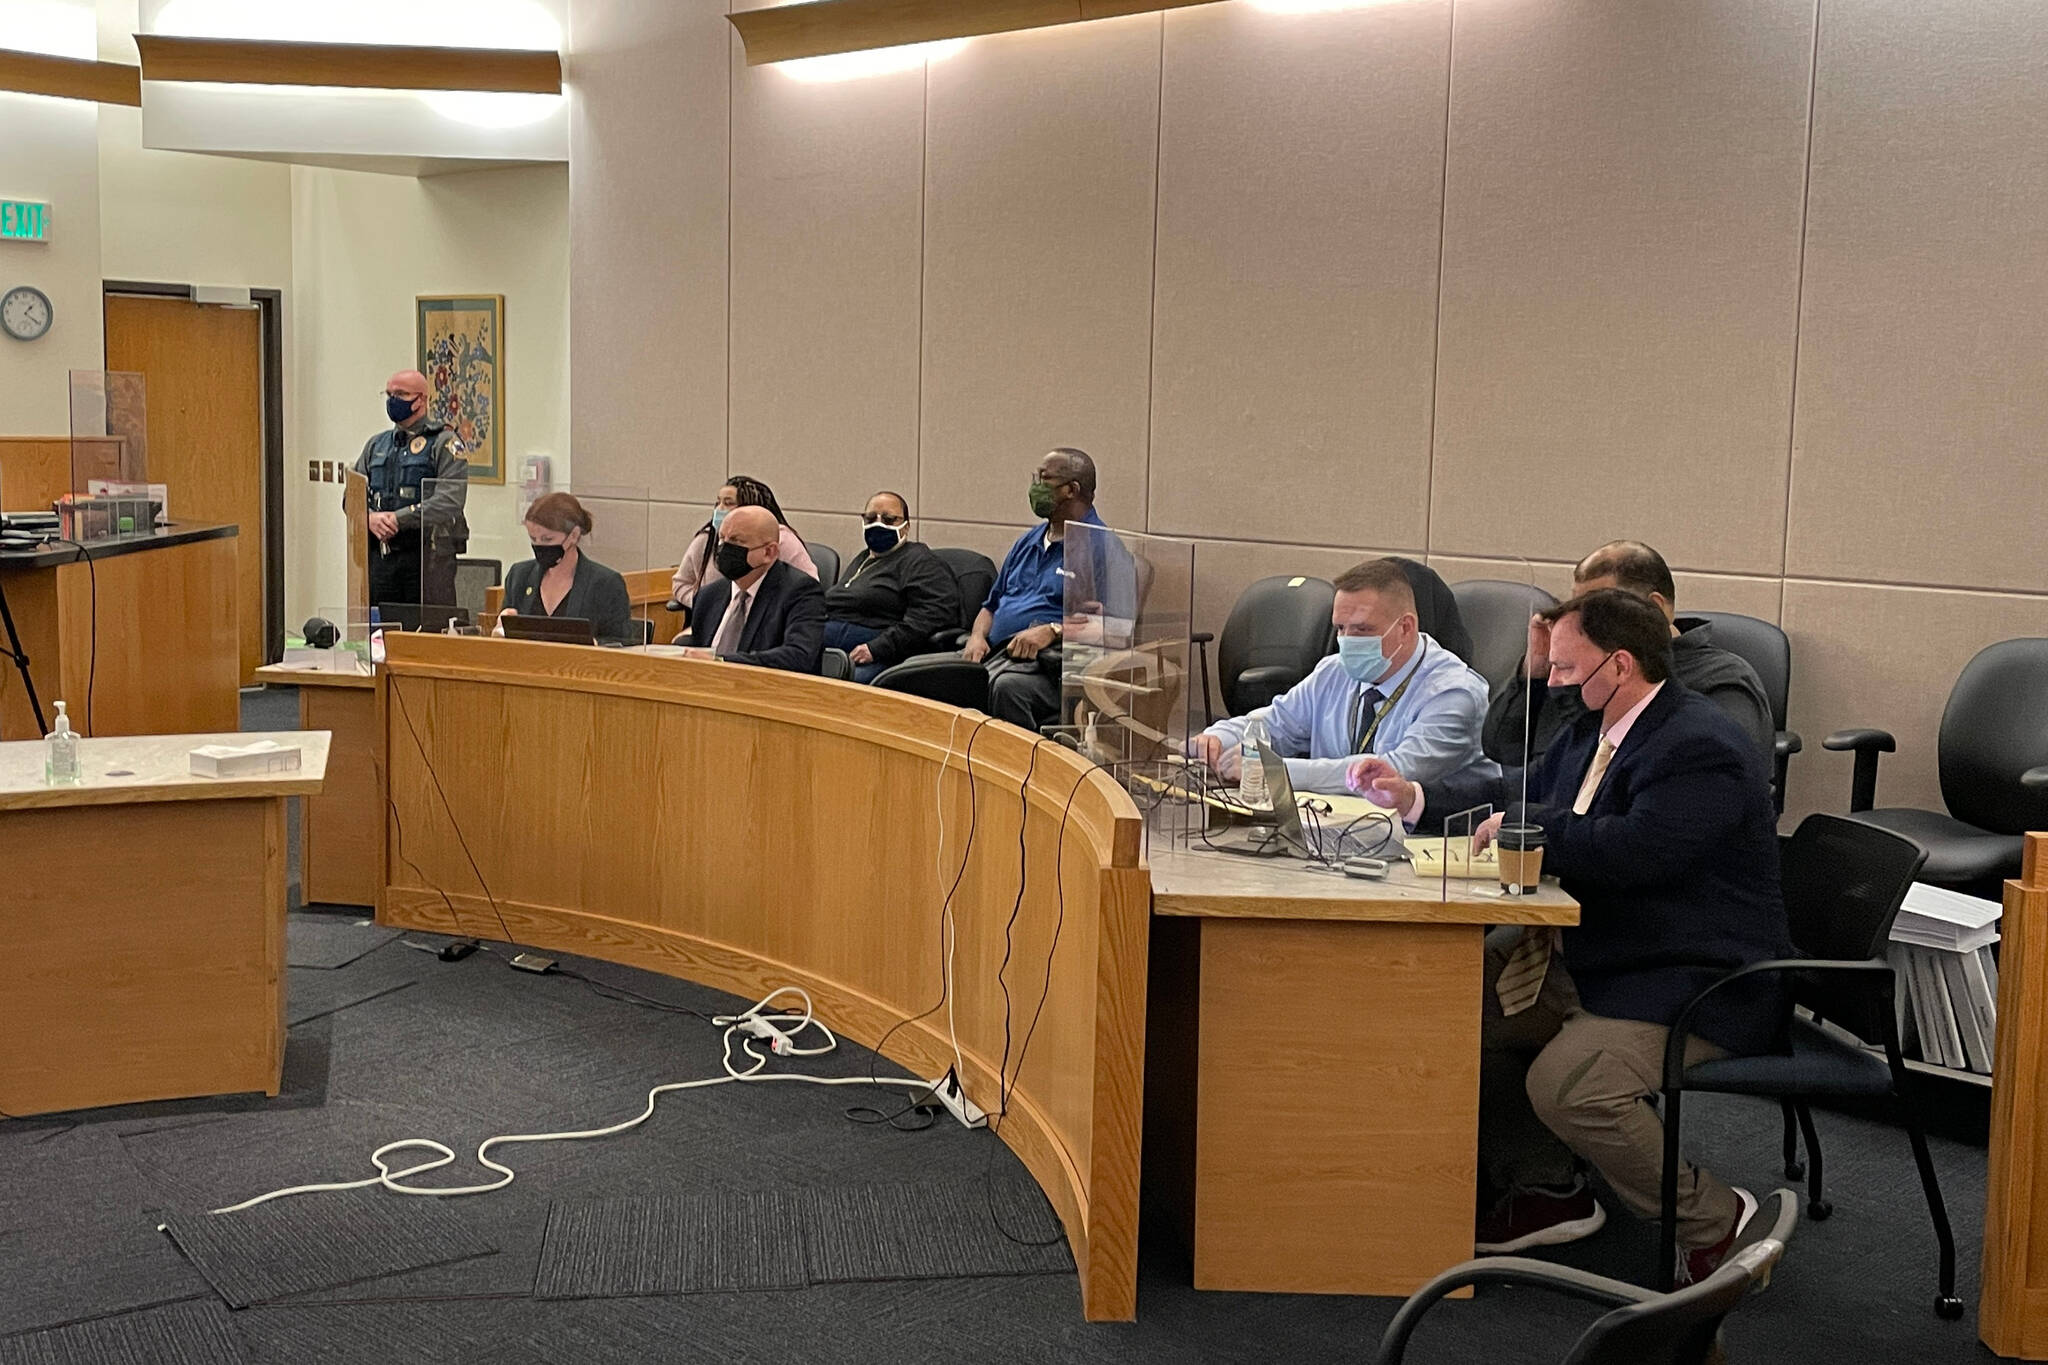 Michael S. Lockett / Juneau Empire File
Members of the prosecution and defense, including defendant John Stapleton, sit on Jan. 13 during a trial for a 2018 killing.